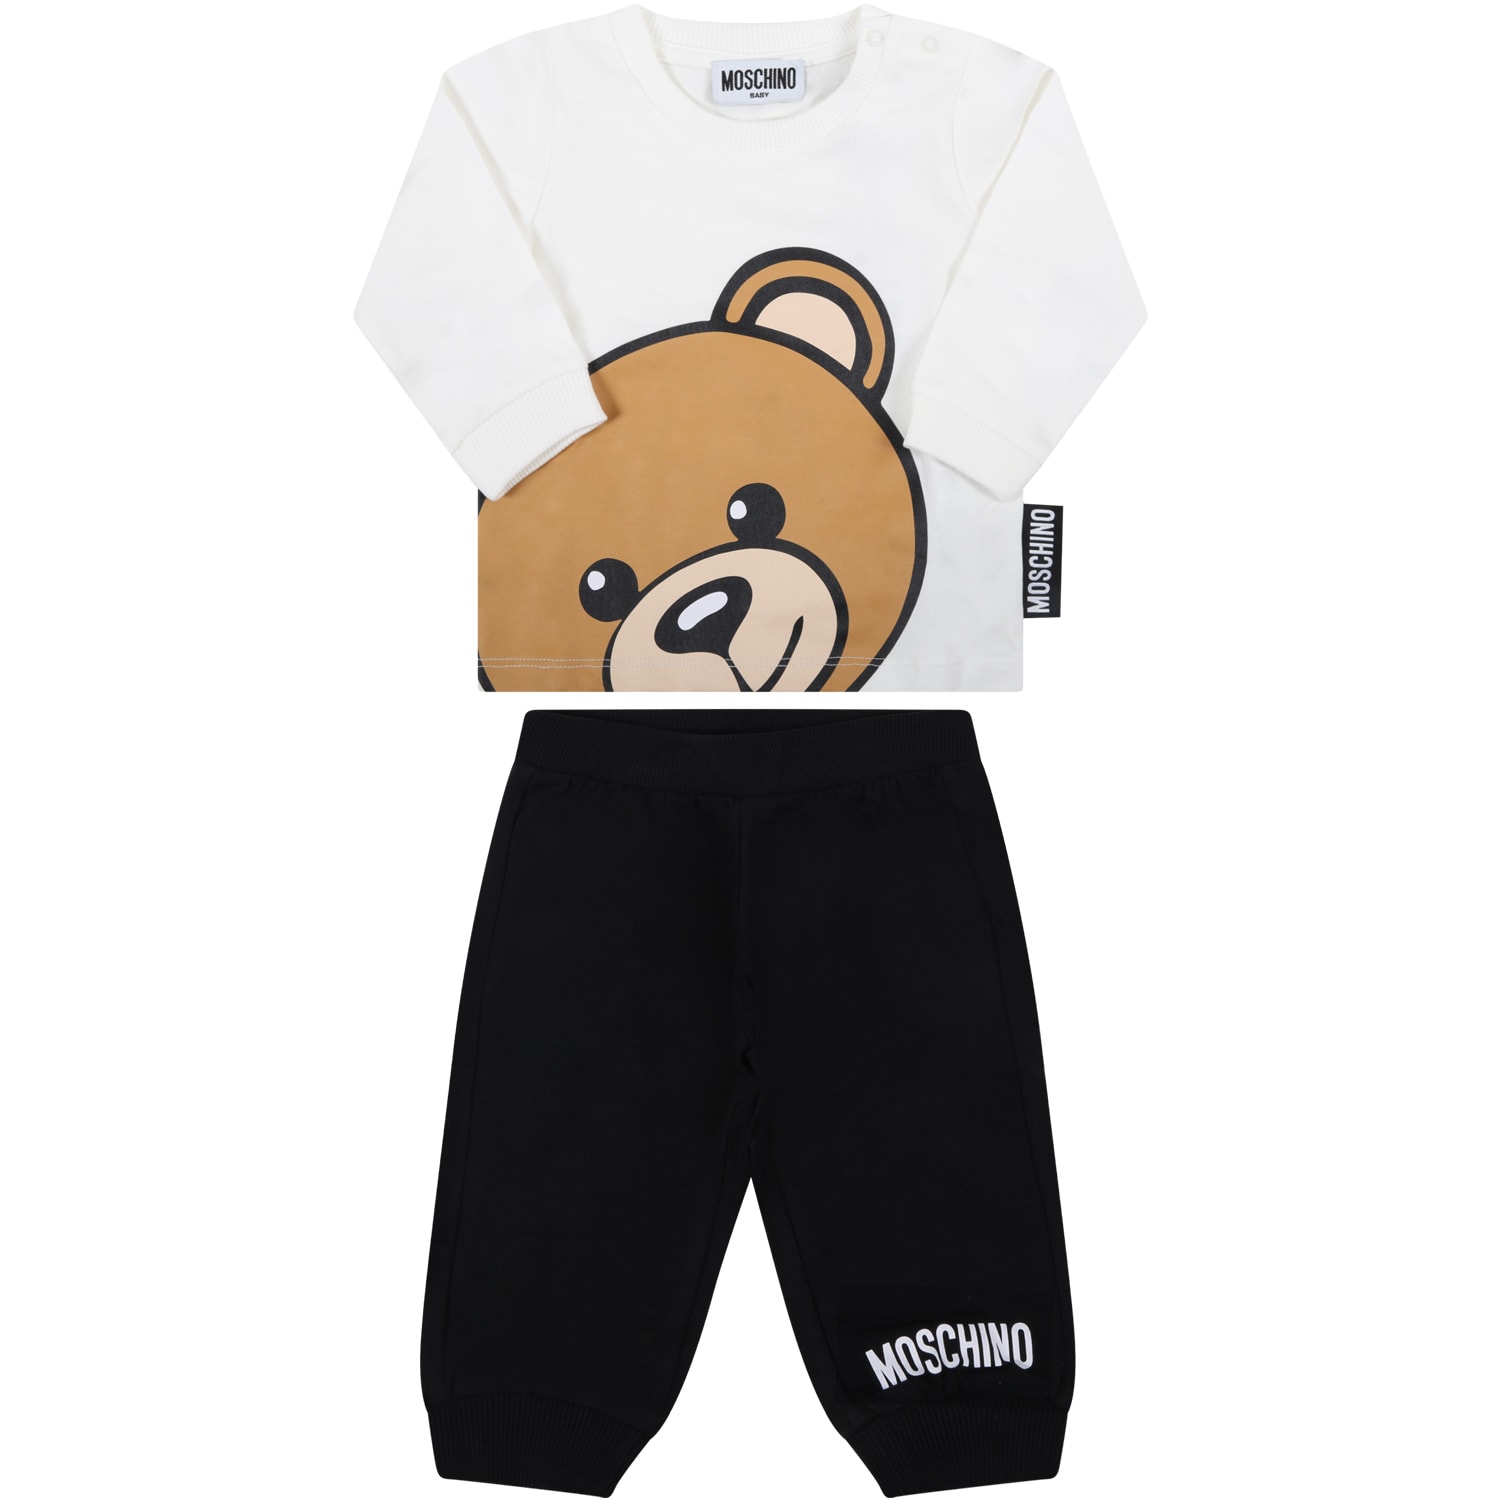 Moschino Multicolor Suit For Baby Kids With Teddy Bear